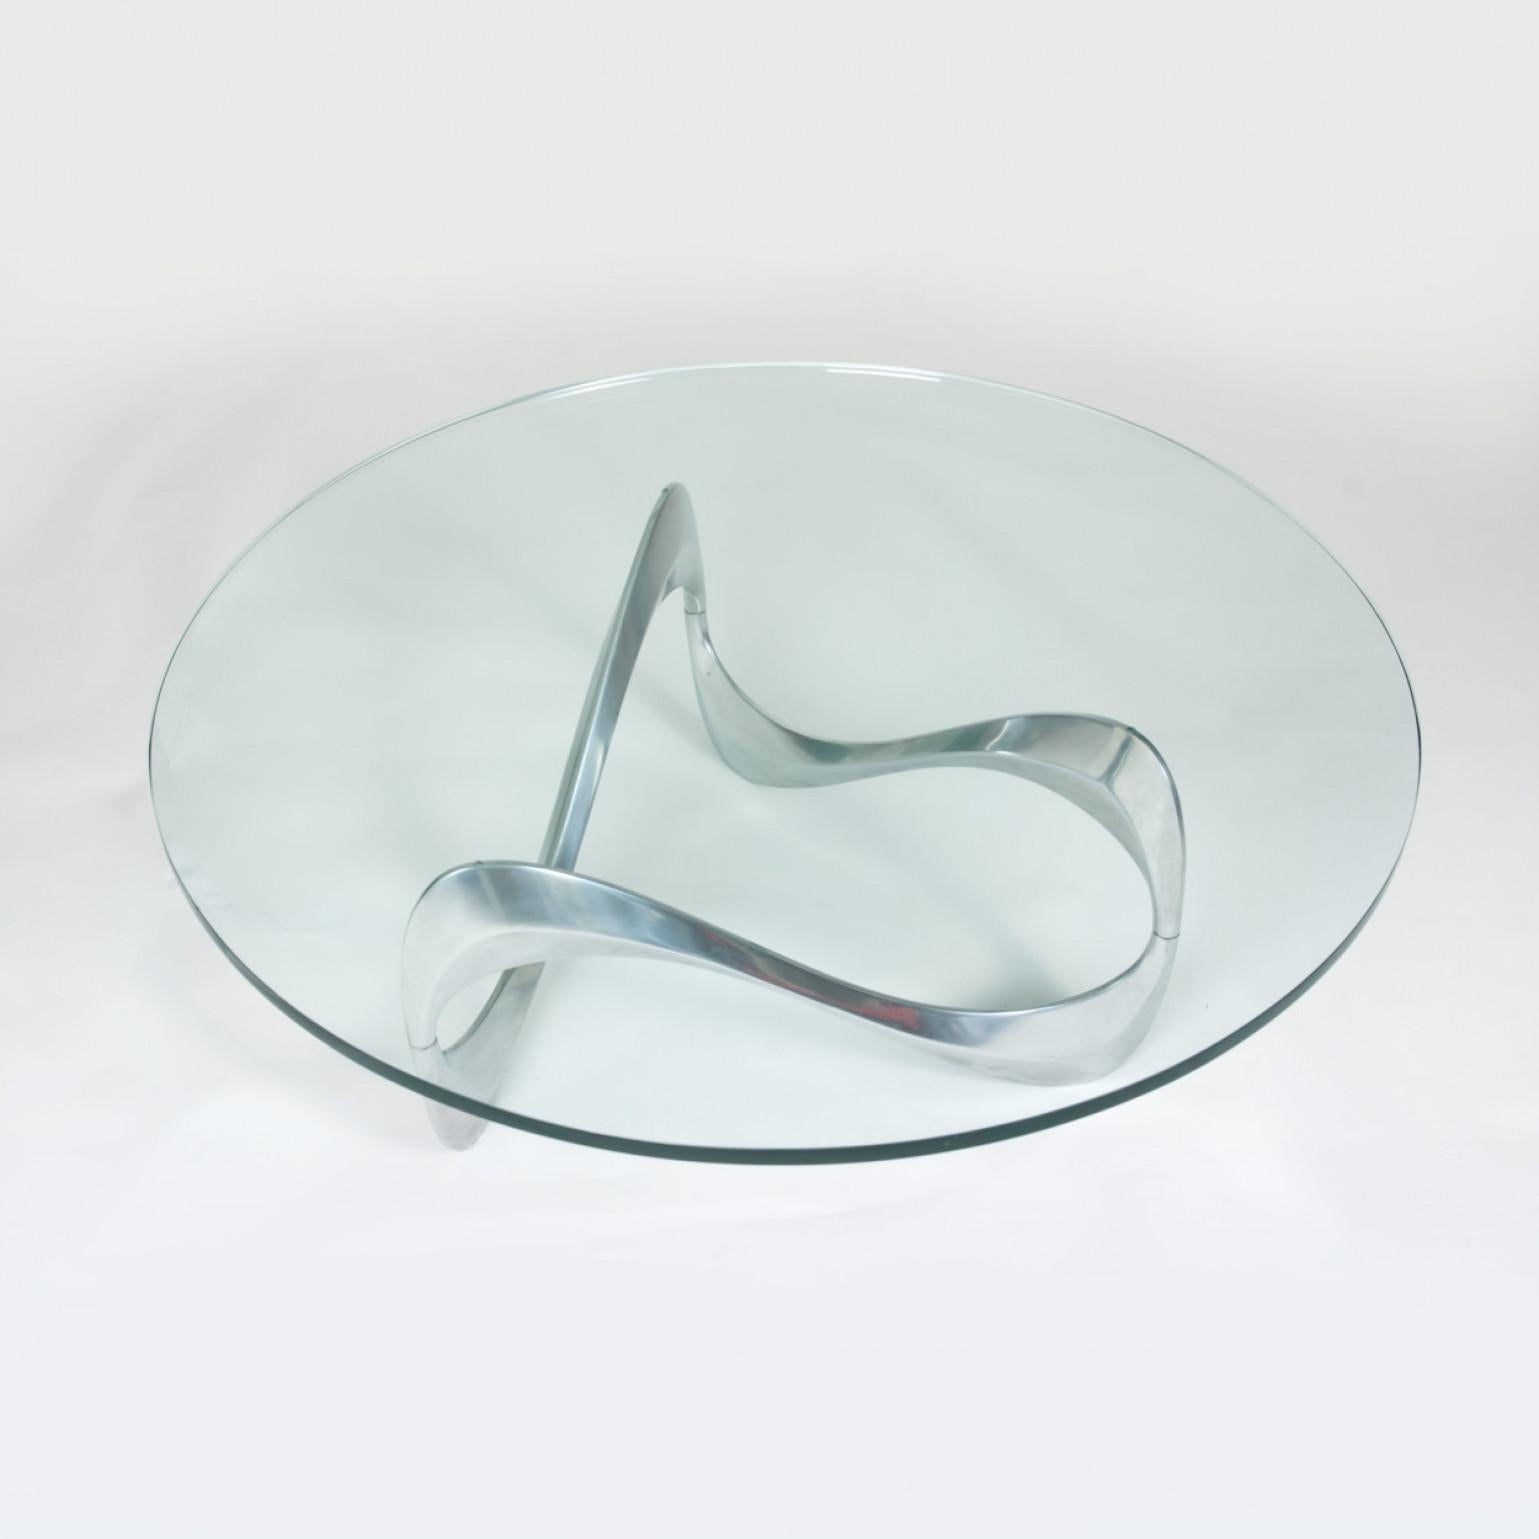 Other Sculptural Chrome Coffee or Side Table by Knut Hesterberg, 1960 For Sale